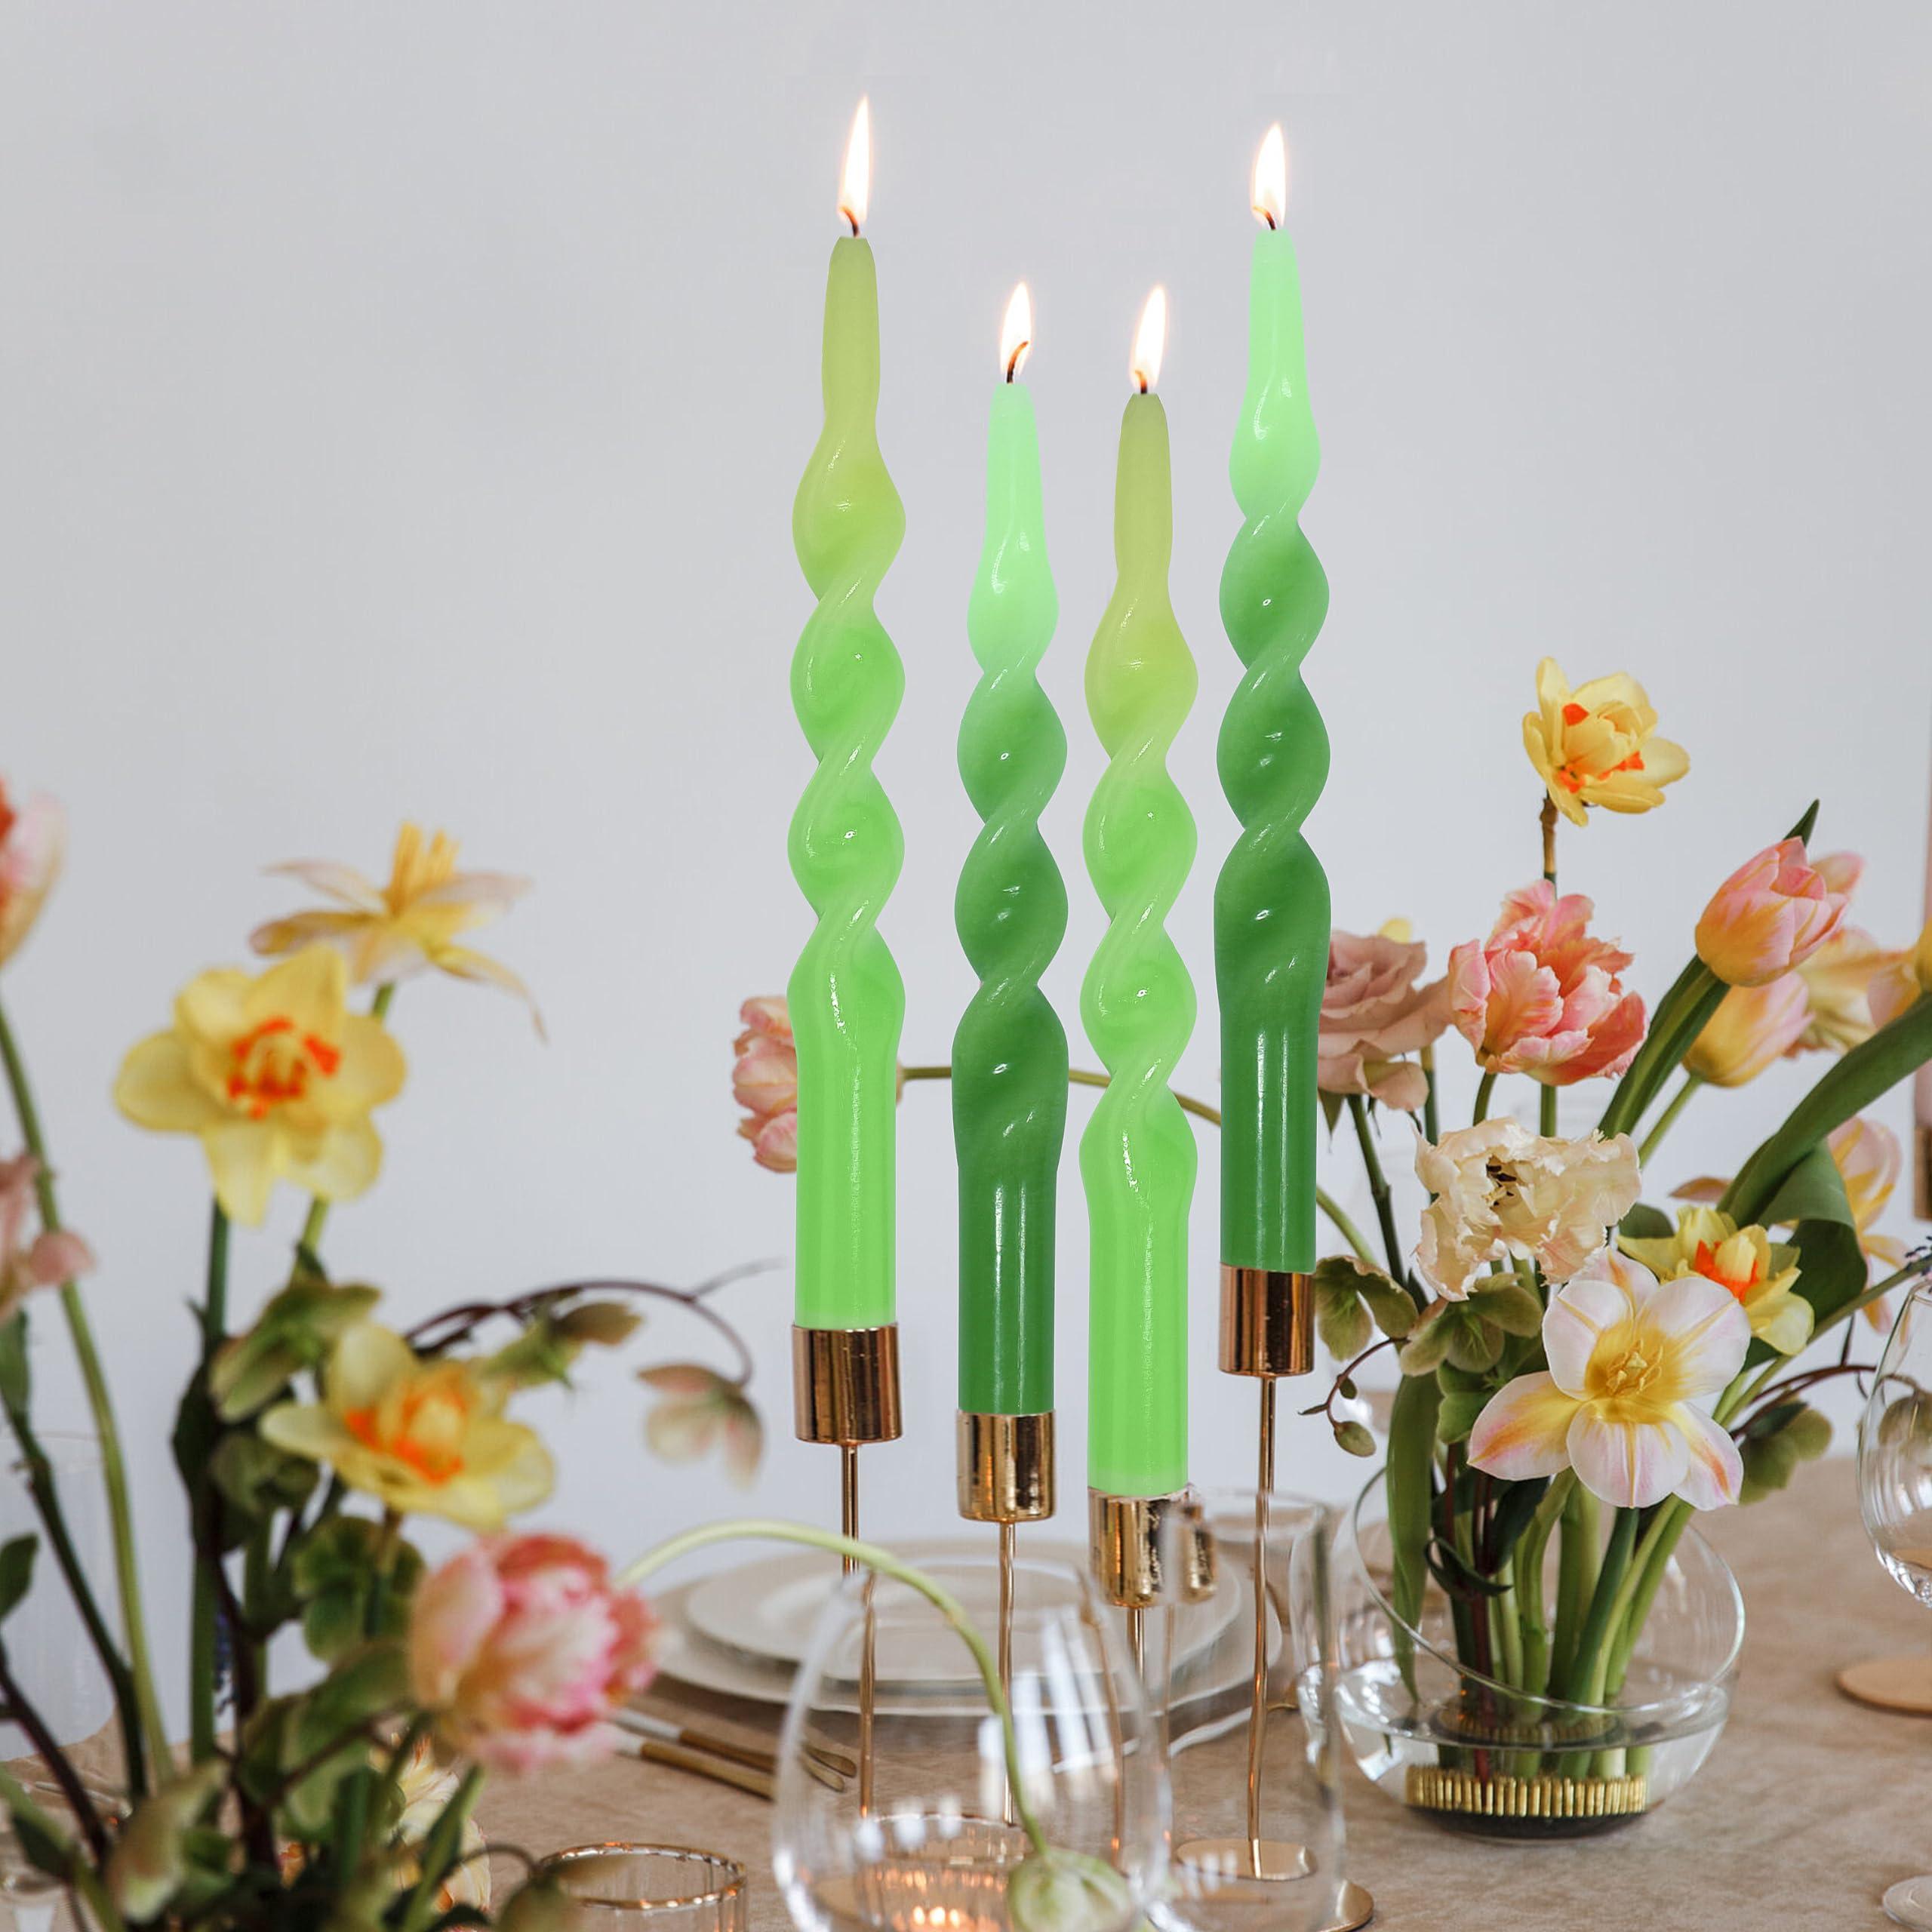 Gedengni 10inches Spiral Taper Candles Yellow Green Candlesticks Twisted Tapered Candles - 2PCS Unscented Candles for Wedding Dinner Party Decoration 2